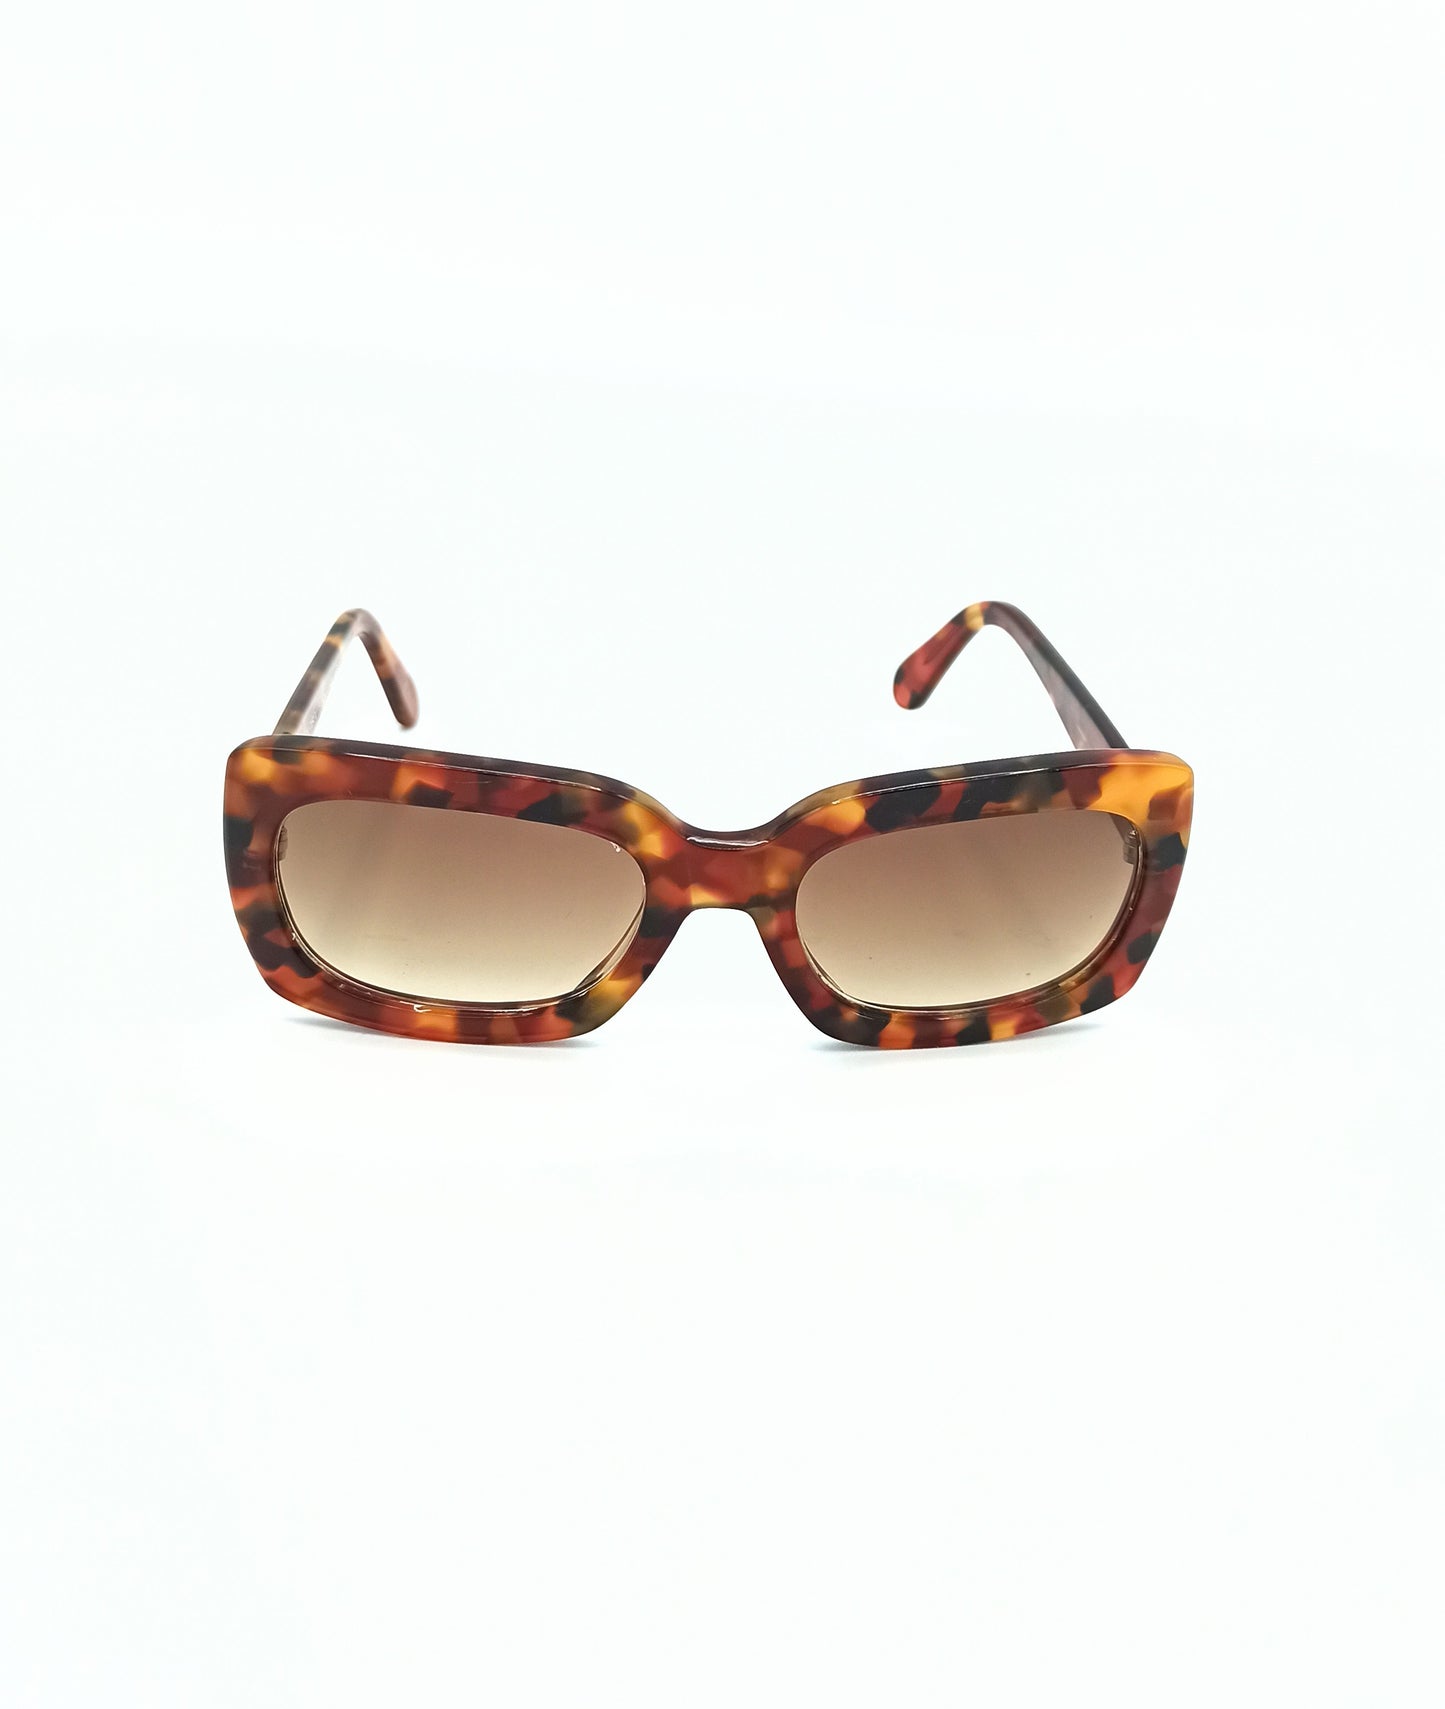 Vintage Caribou women's sunglasses made in Spain Qoolst